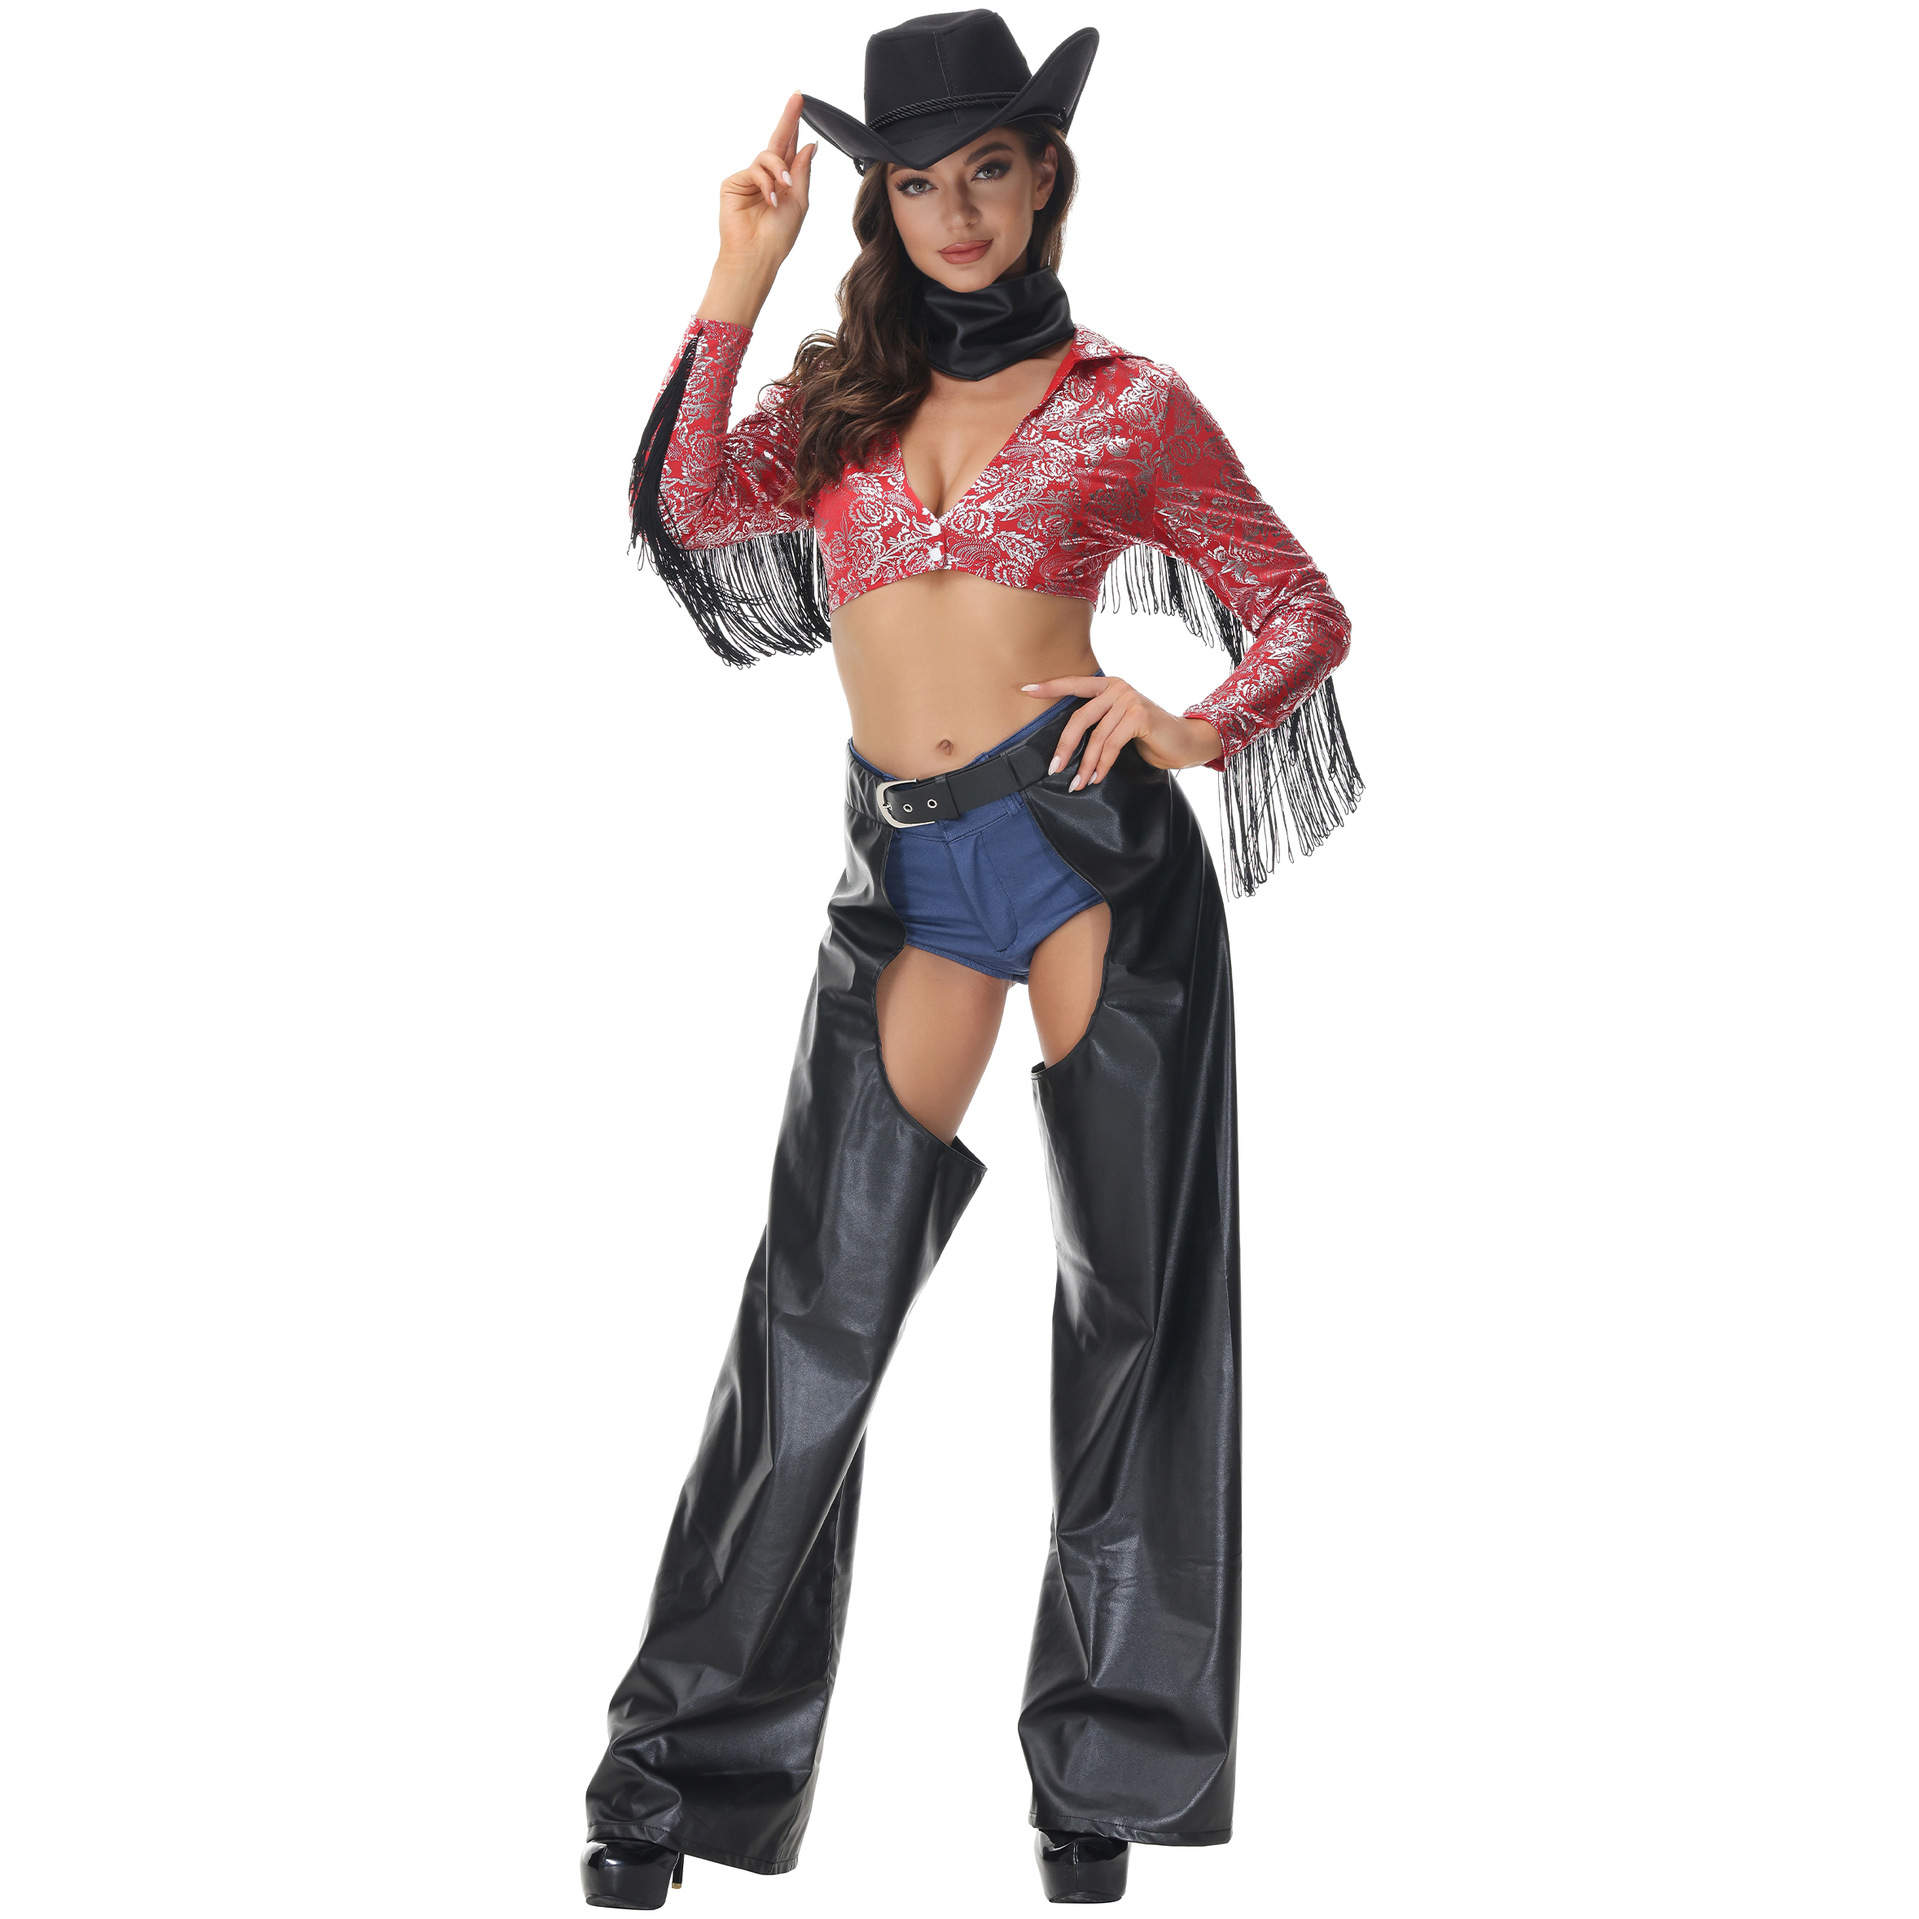 Wild West cowboy costume for Kids. Express delivery